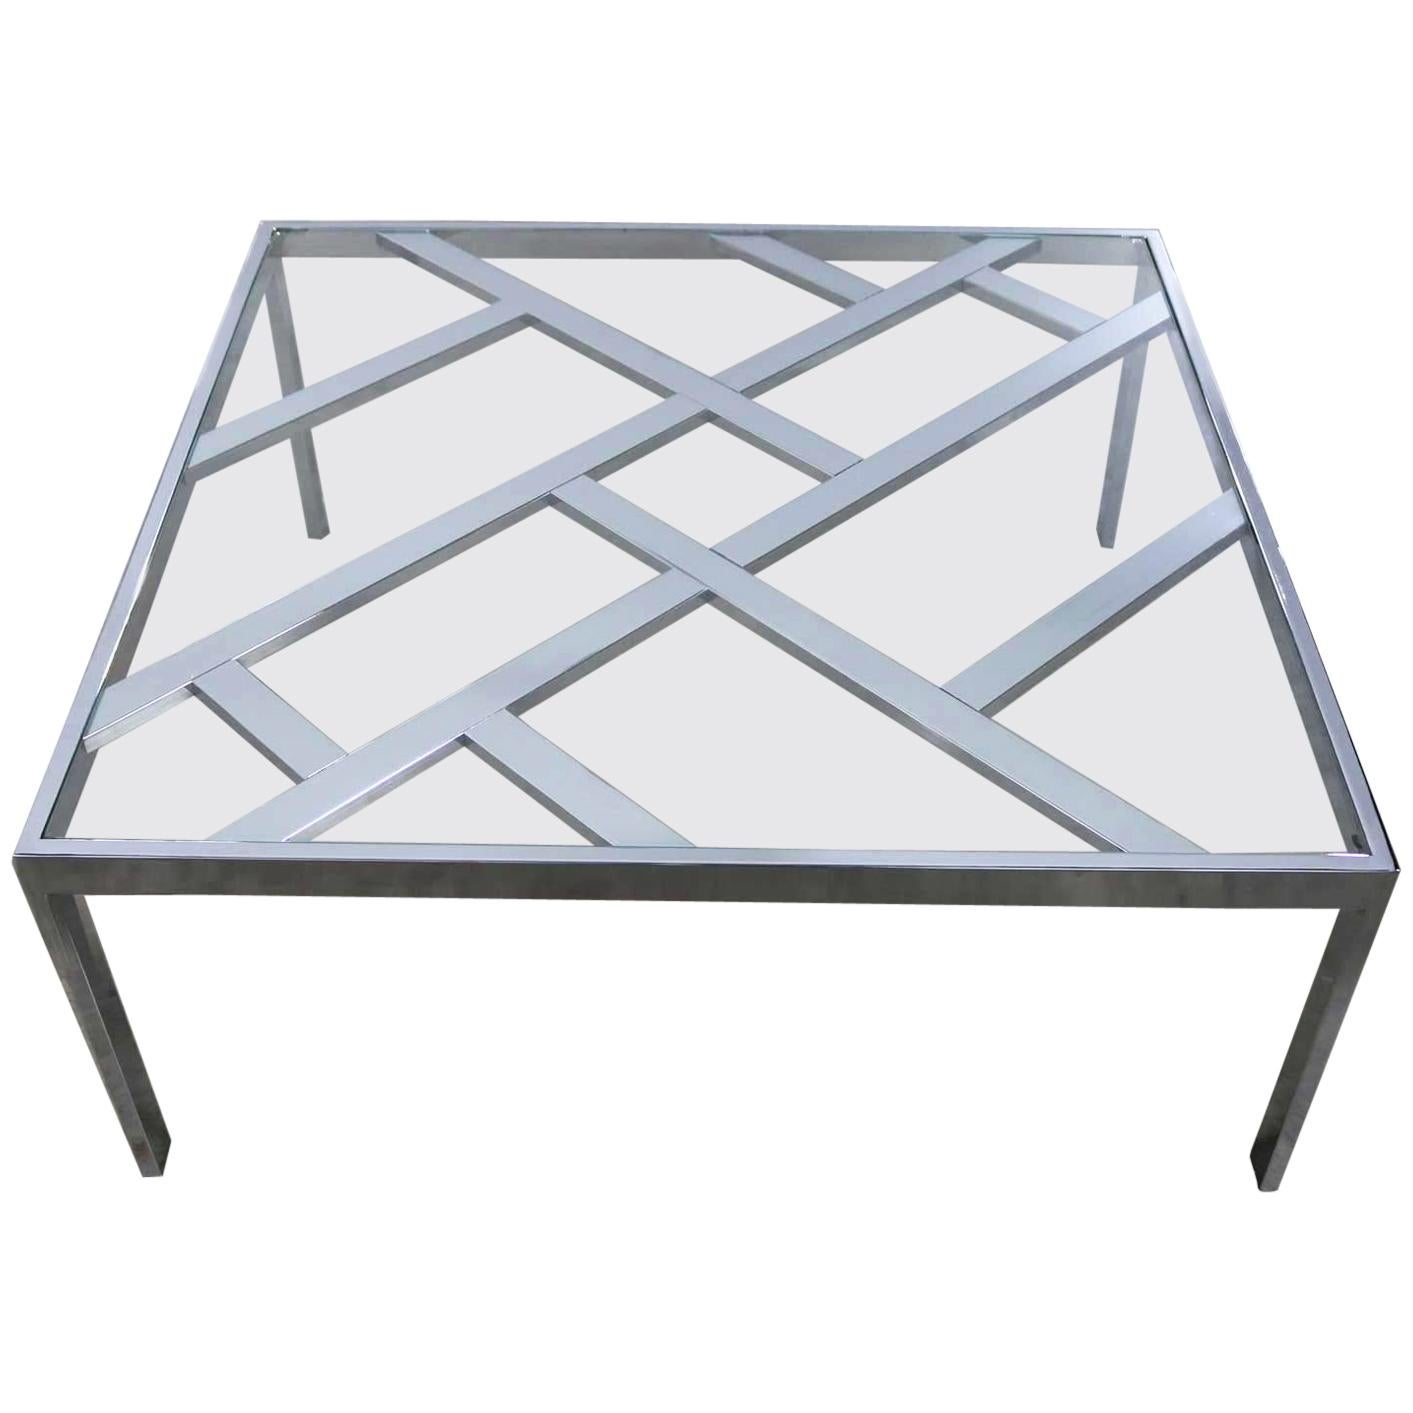 Hollywood Regency Chrome Square Glass Top Coffee Table after Milo Baughman